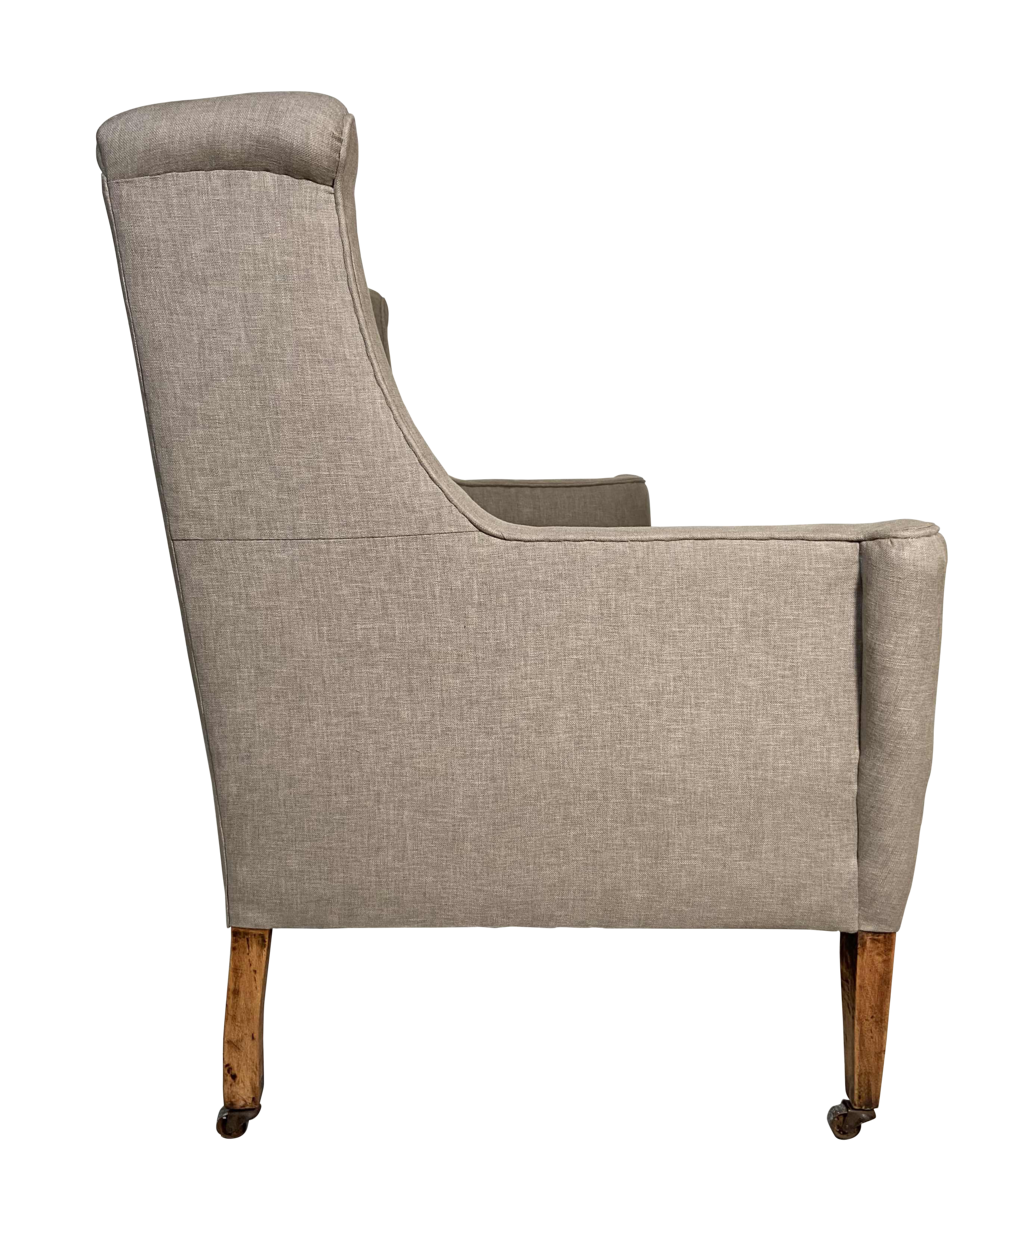 Two Seat Winged Sofa on Square Tapering Legs